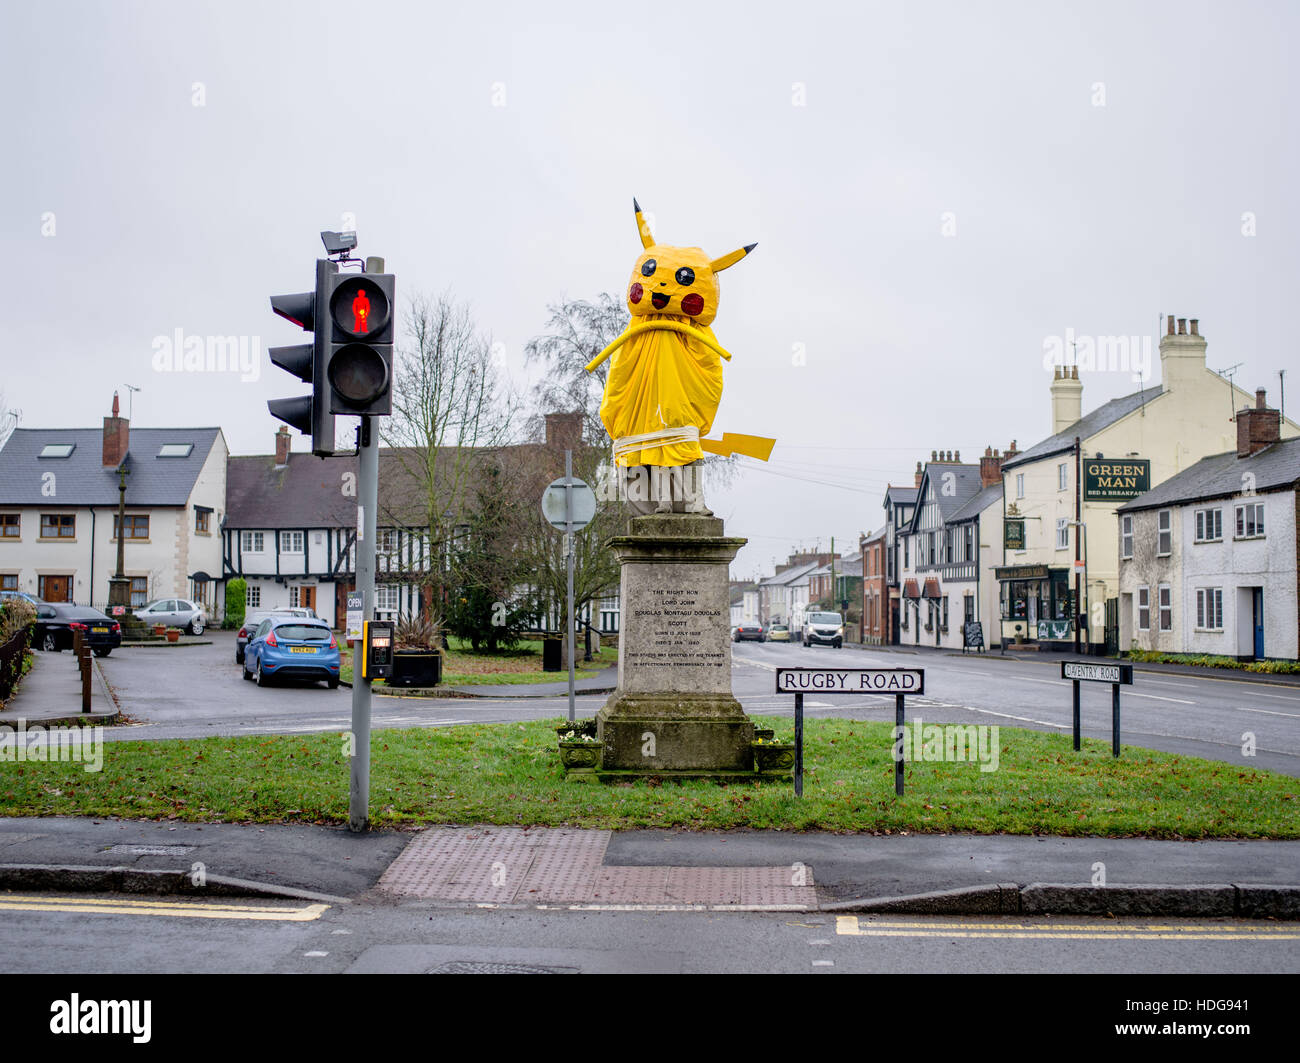 Dunchurch, Warwickshire, England. 12th December 2016. The statue of Lord John Scott in the village of Dunchurch has been covered in the disguise of Pokemon character Pikachu. In a tradition spanning decades, a secretive group of villagers dress the statue annually on the run-up to Christmas. The character chosen is normally someone who has made an impact in the year; in this case an homage to the social phenomena of Pokemon Go! Credit:  Jamie Gray/Alamy Live News Stock Photo